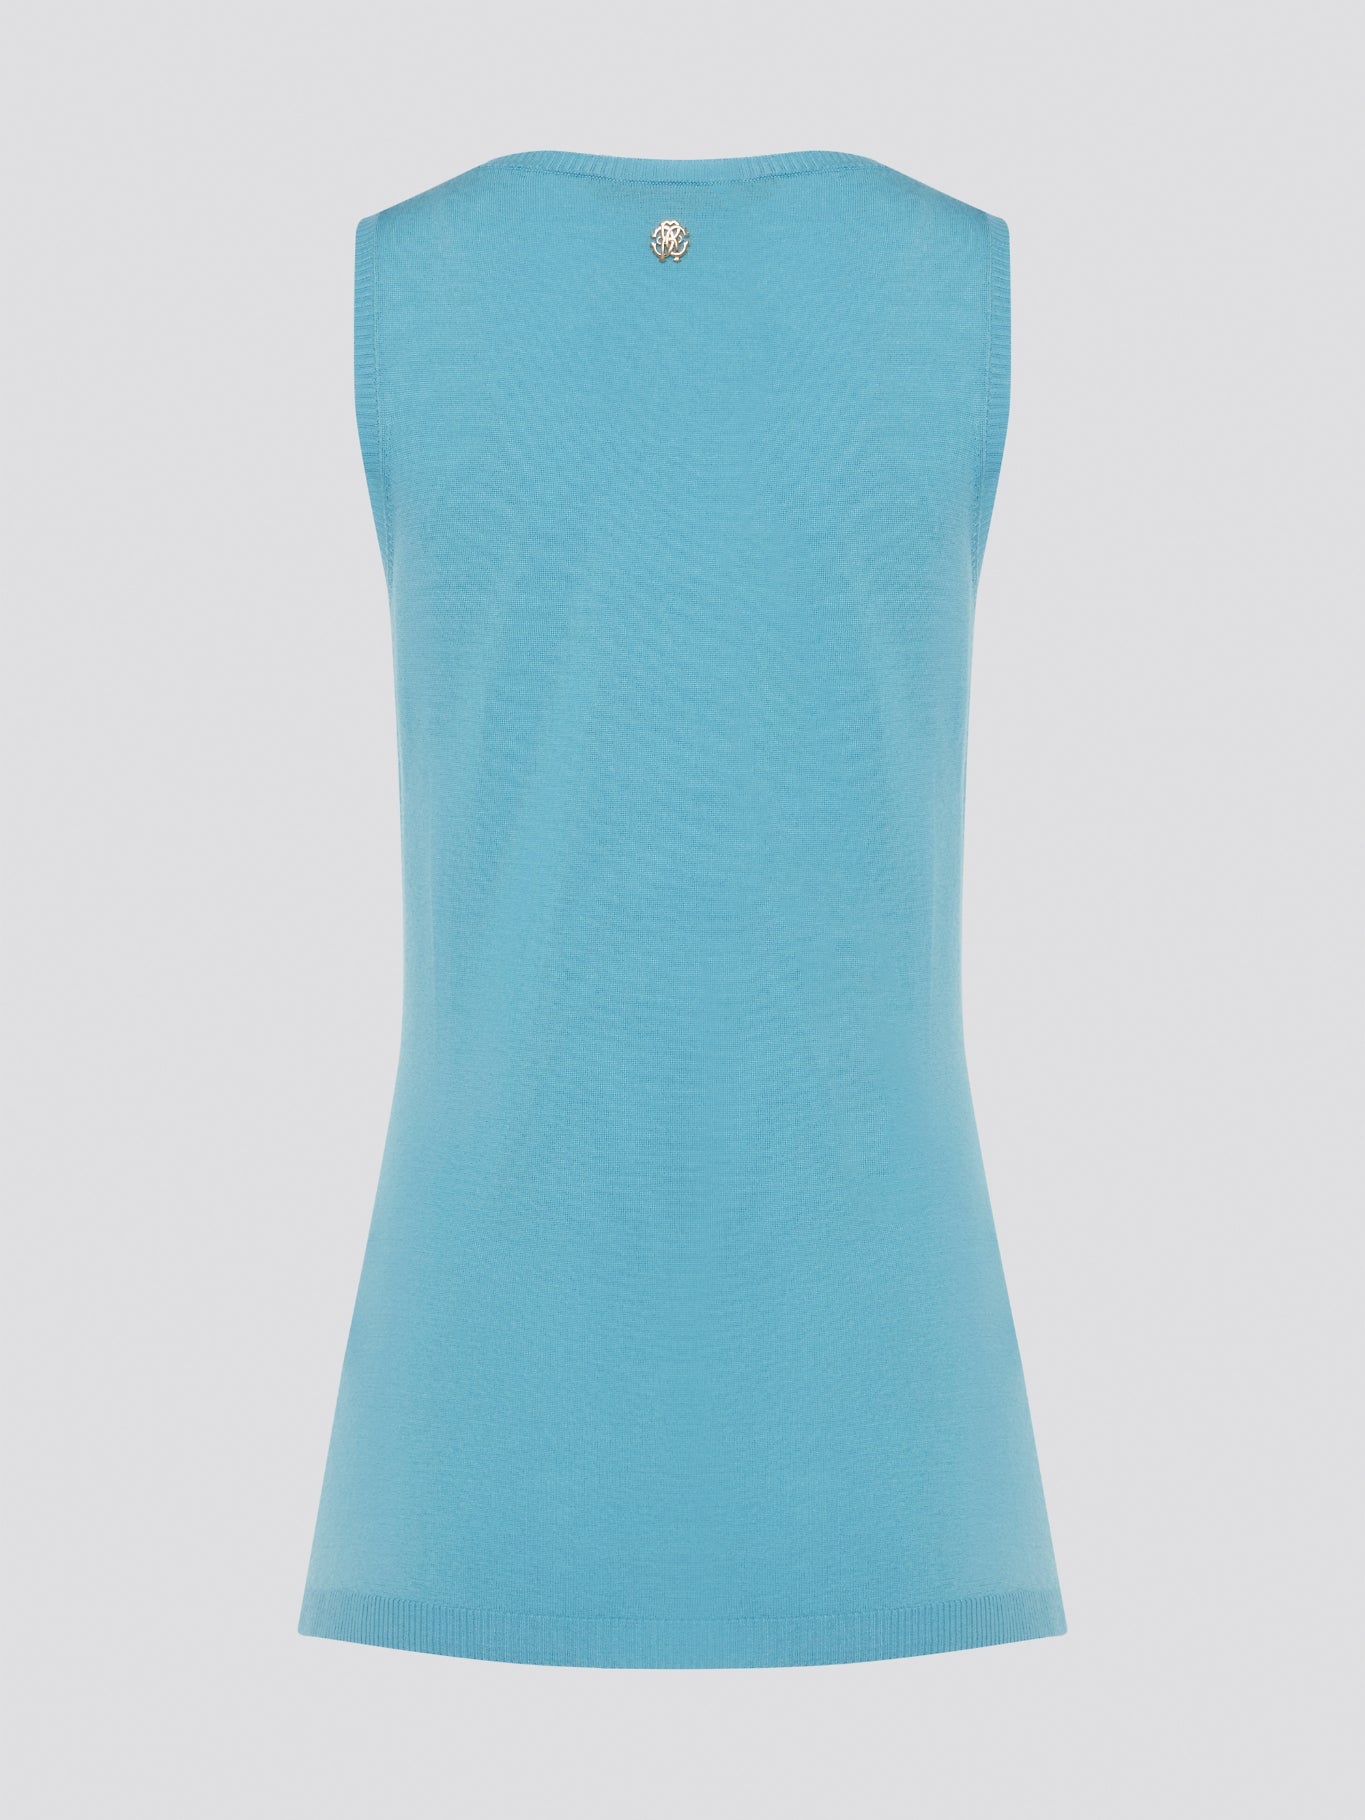 Dive into a sea of luxury with our Blue Sleeveless Top by Roberto Cavalli. Crafted from high-quality materials, this top exudes sophistication and style. Perfect for layering or wearing on its own, this top will elevate any outfit with its stunning blue hue and chic design.